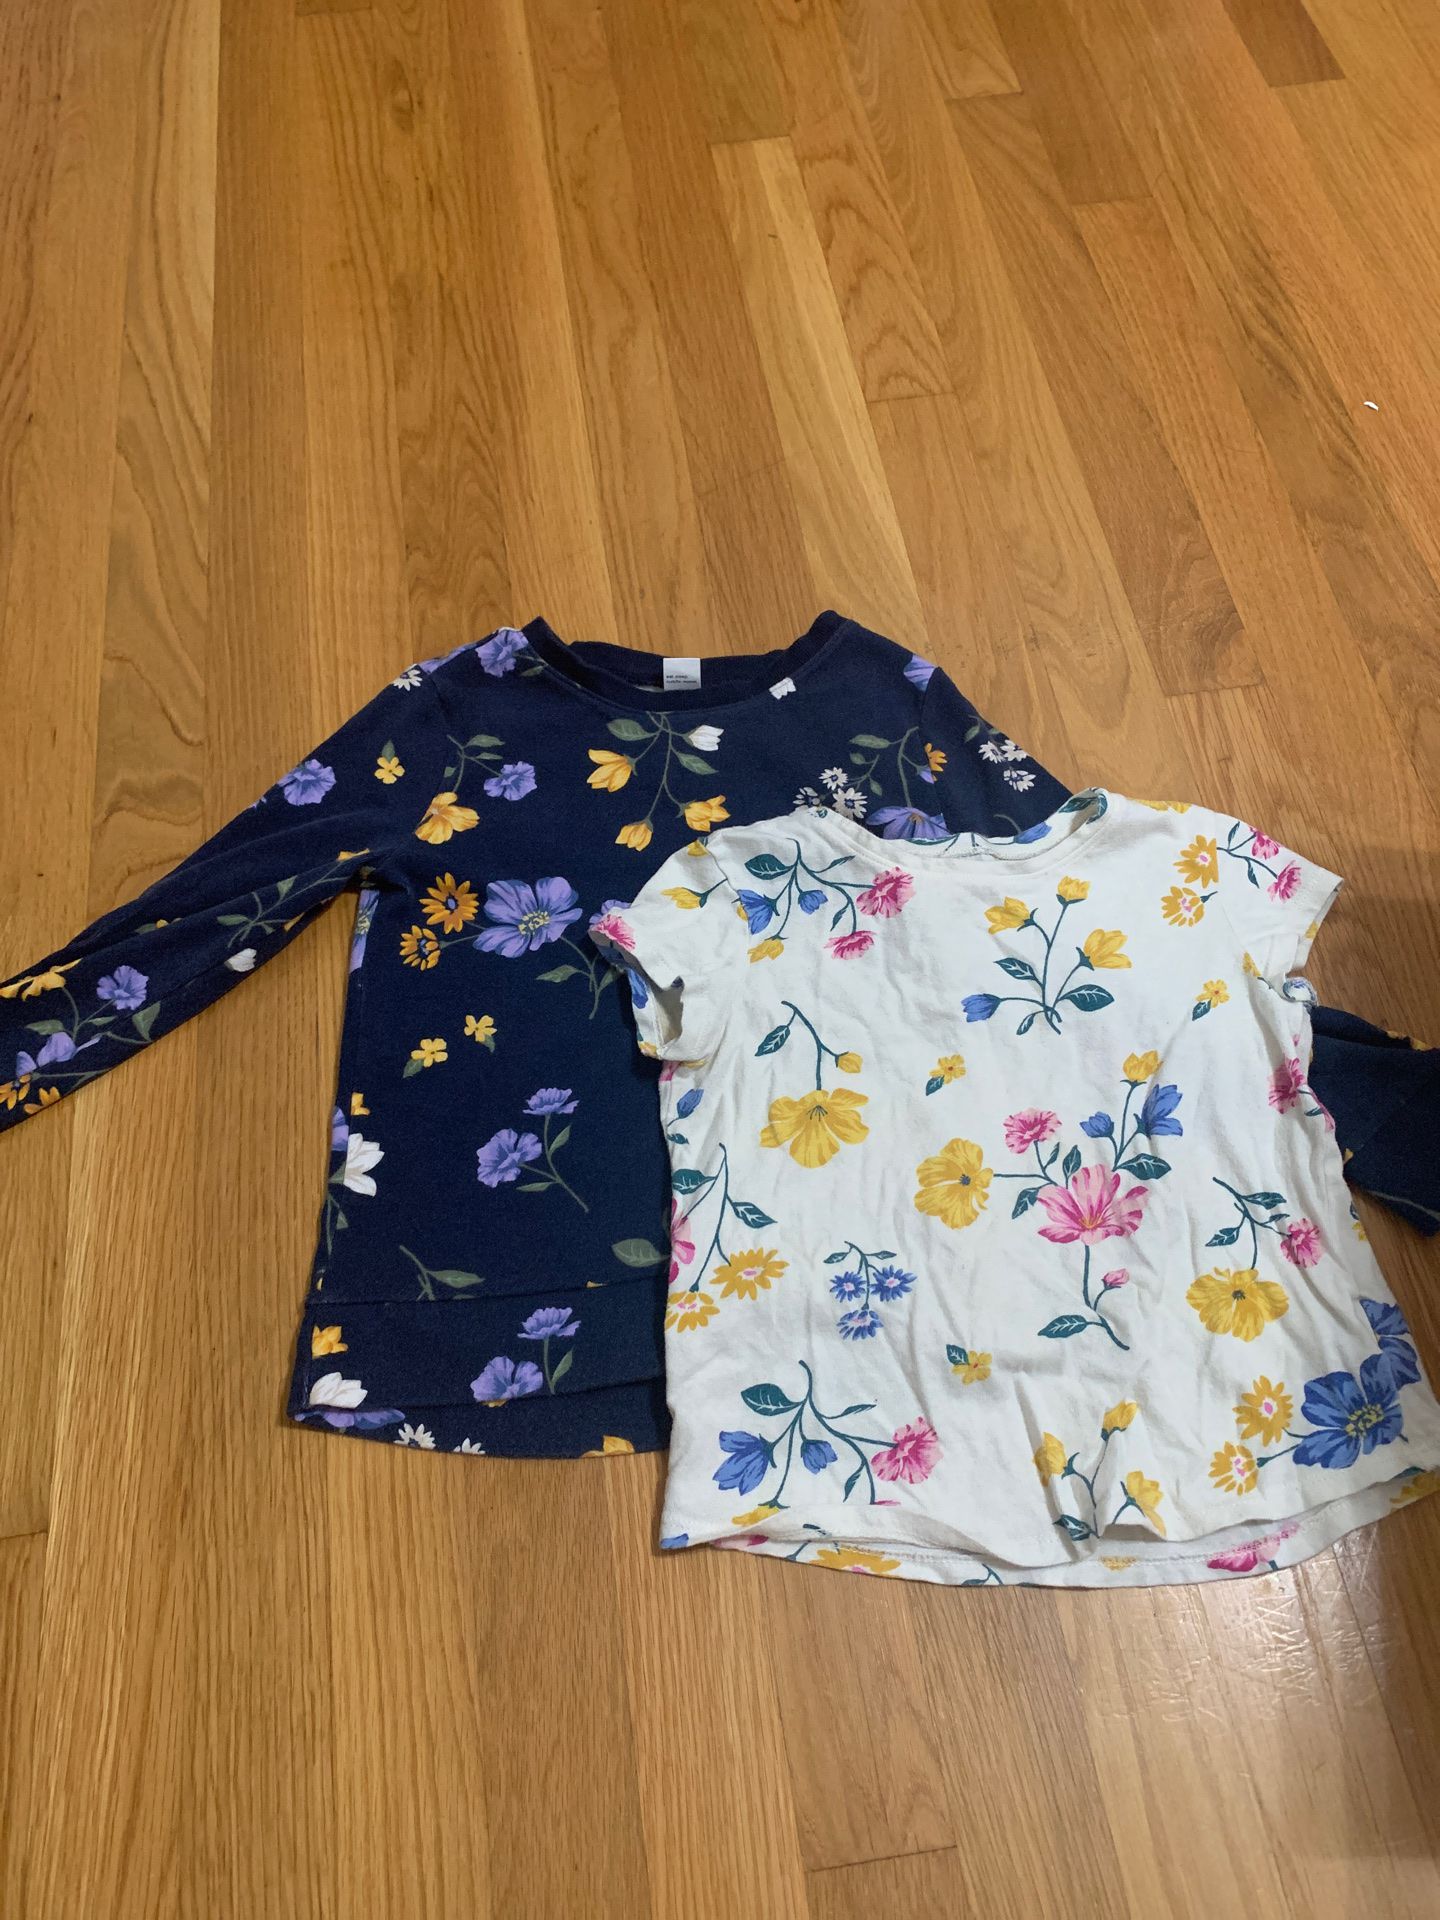 Old navy girl clothes size 5